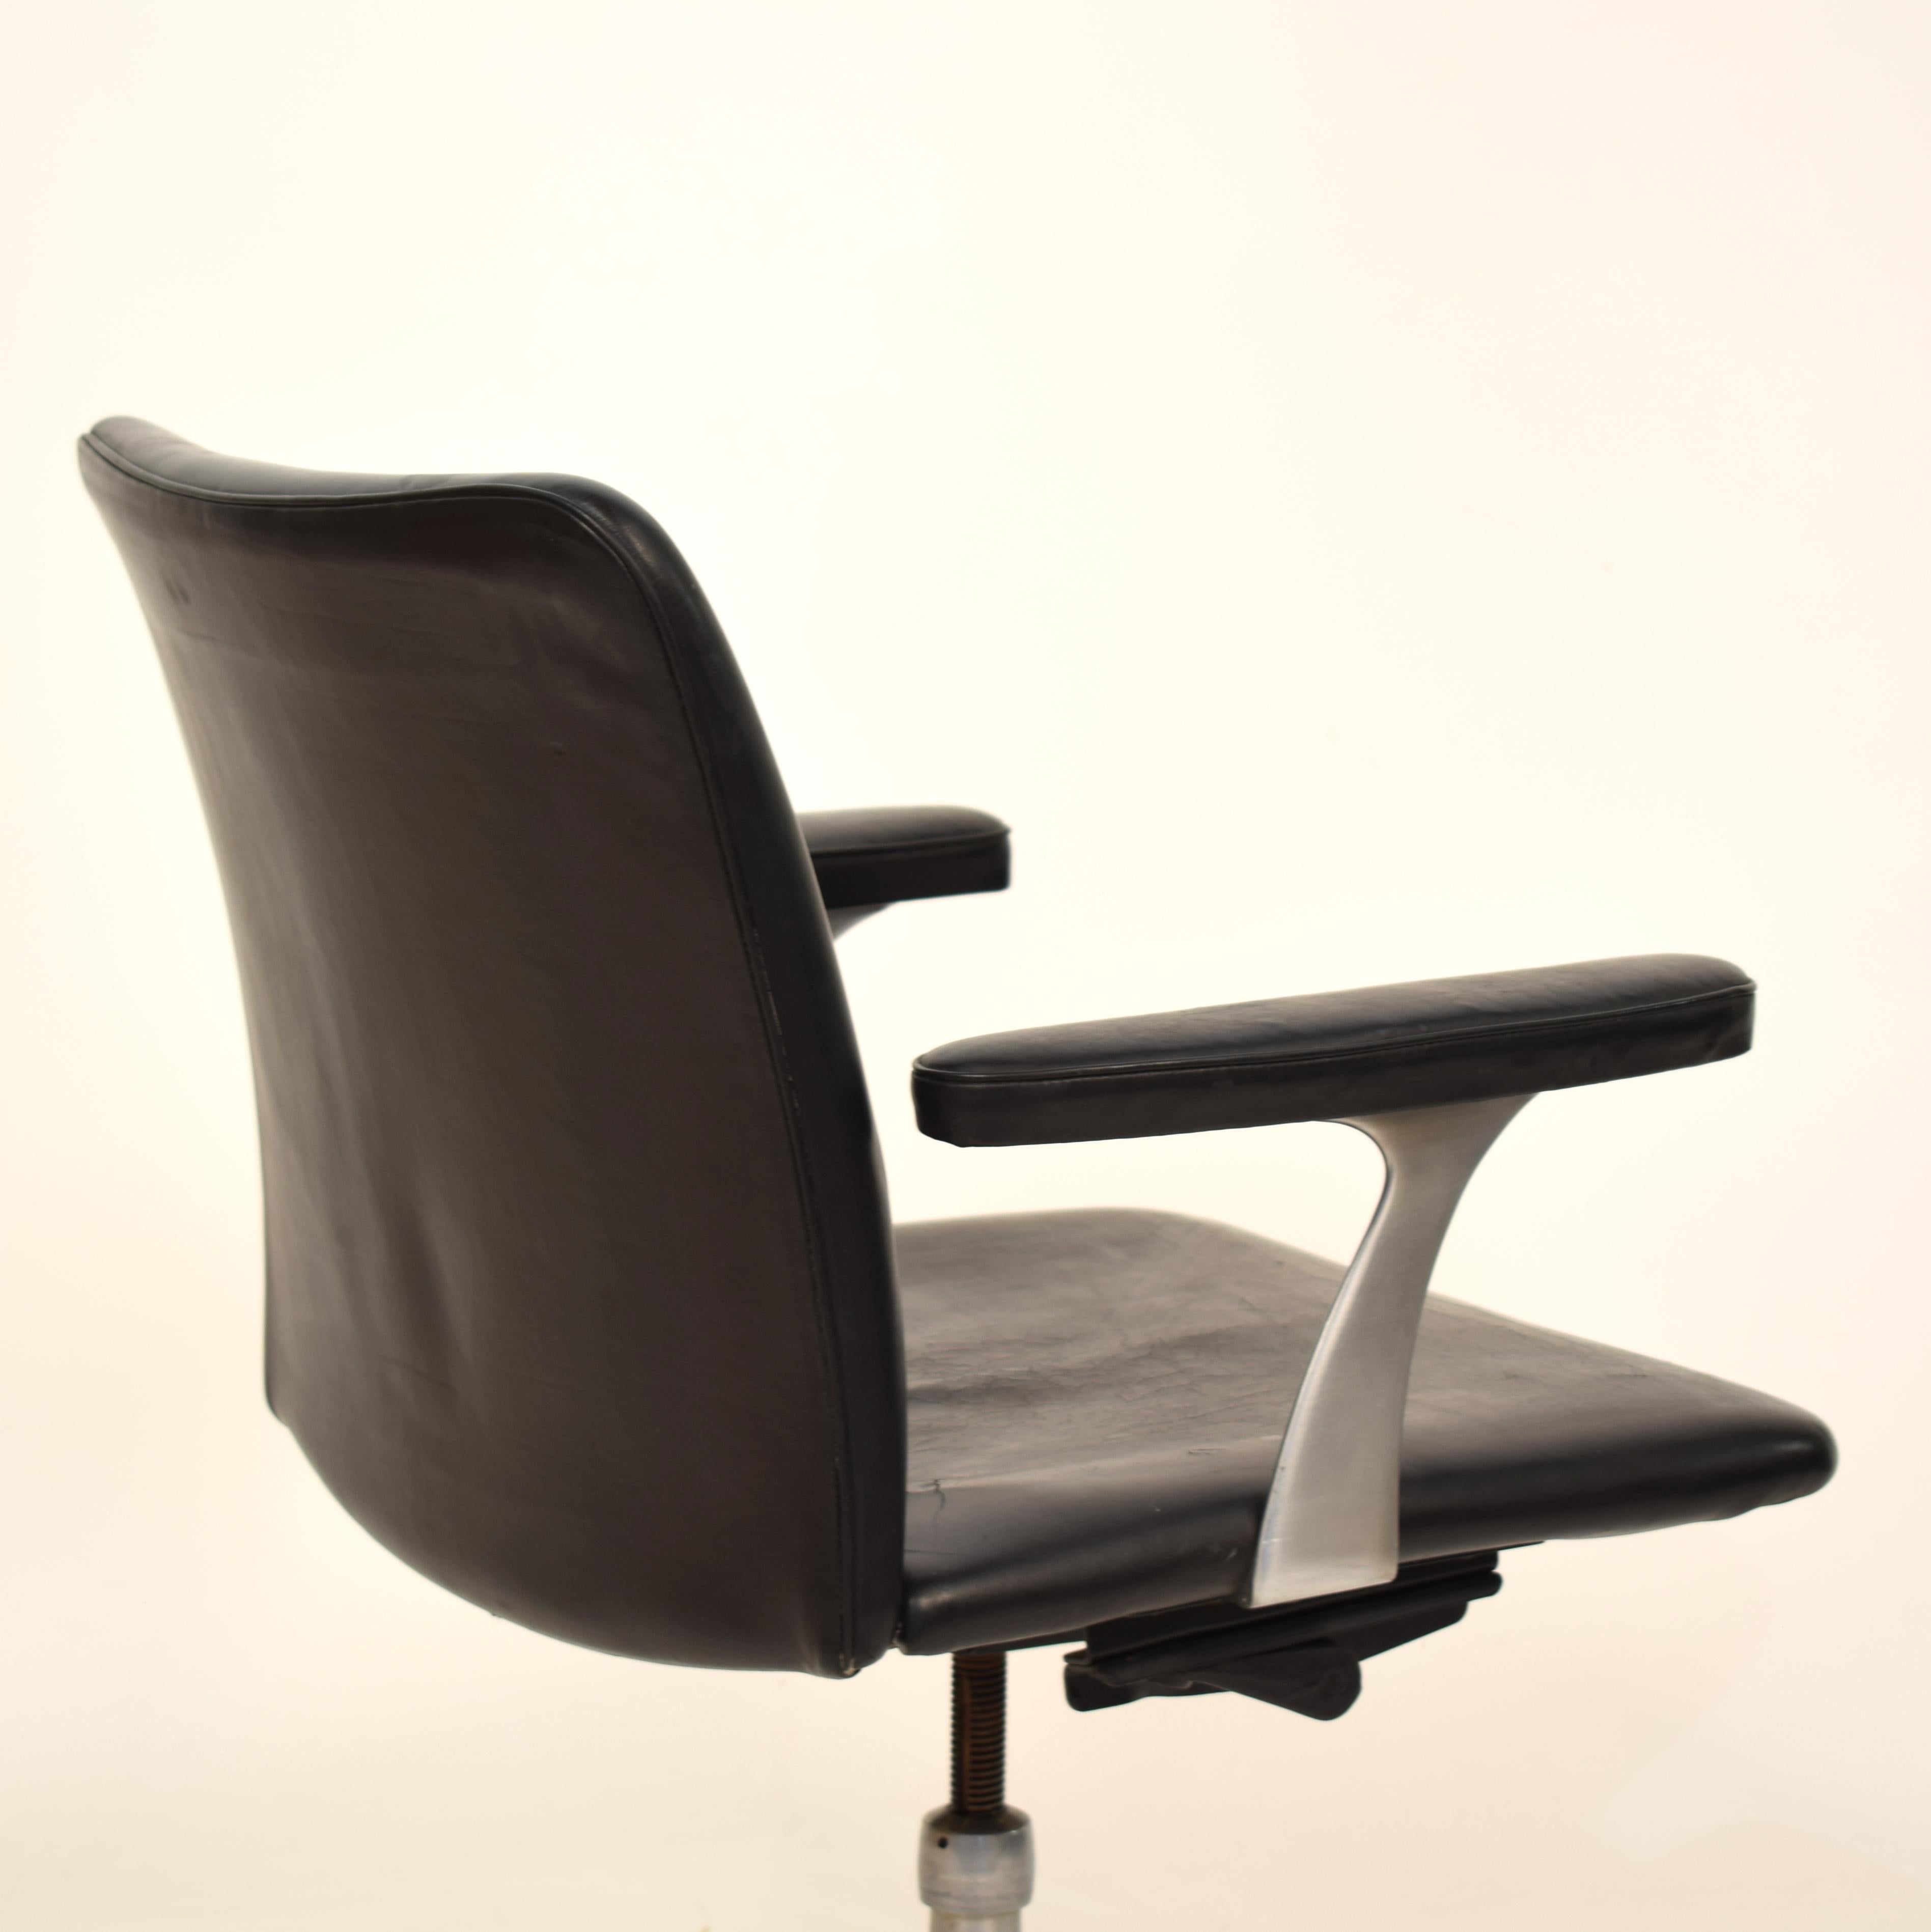 Midcentury Scandinavian Armchair in Black Leather and Aluminum, circa 1970 For Sale 4